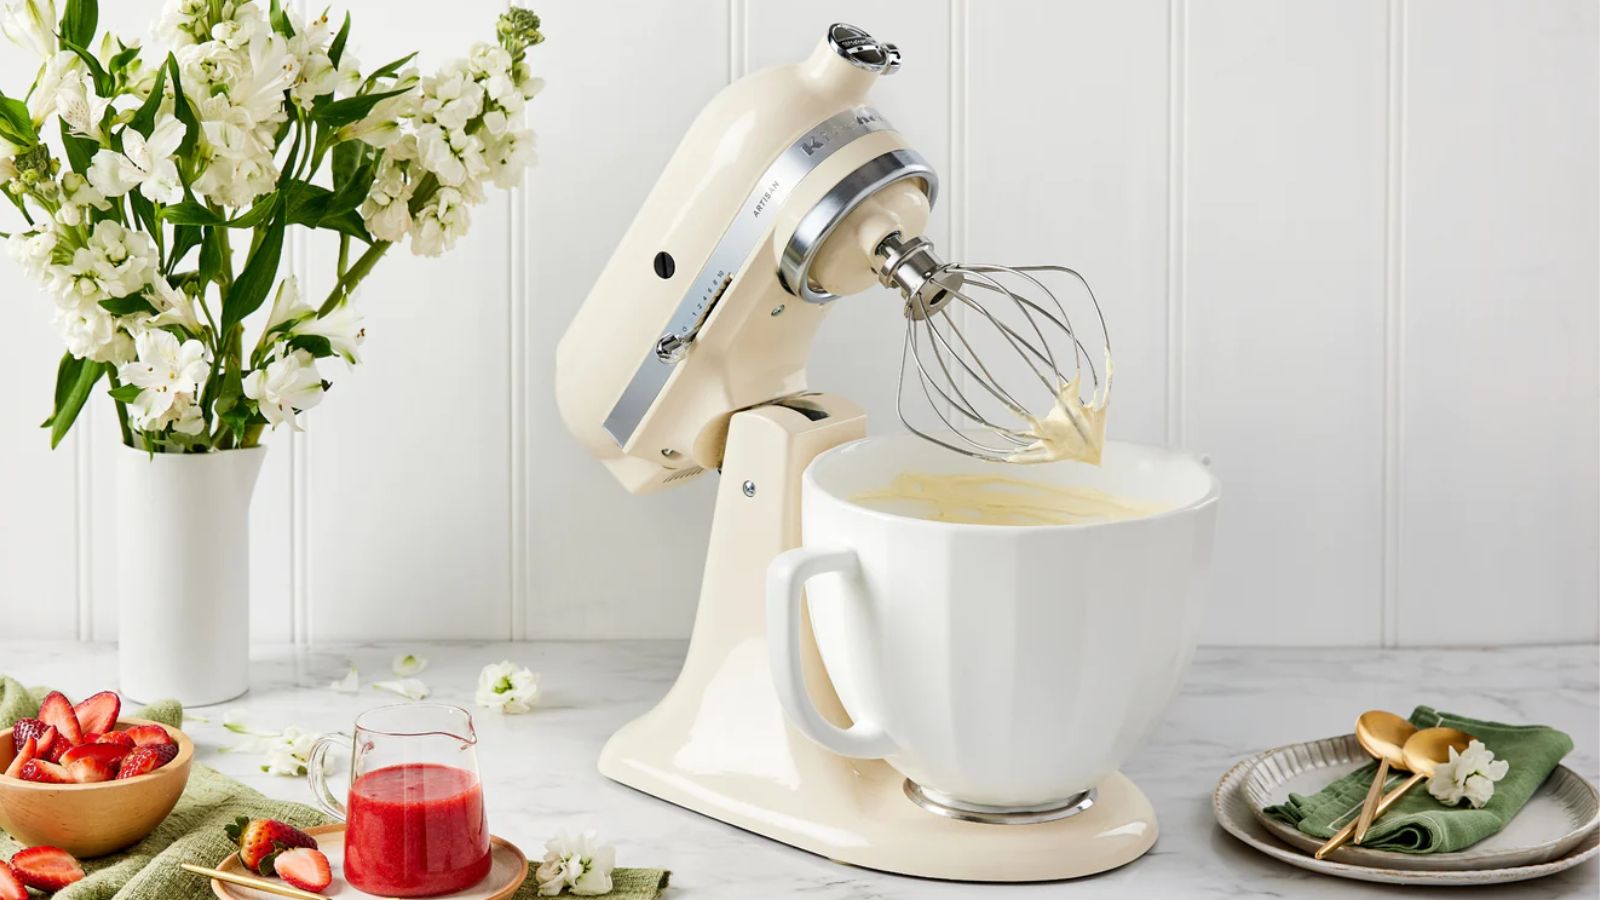 Flat Whisk 10 + Reviews, Crate & Barrel